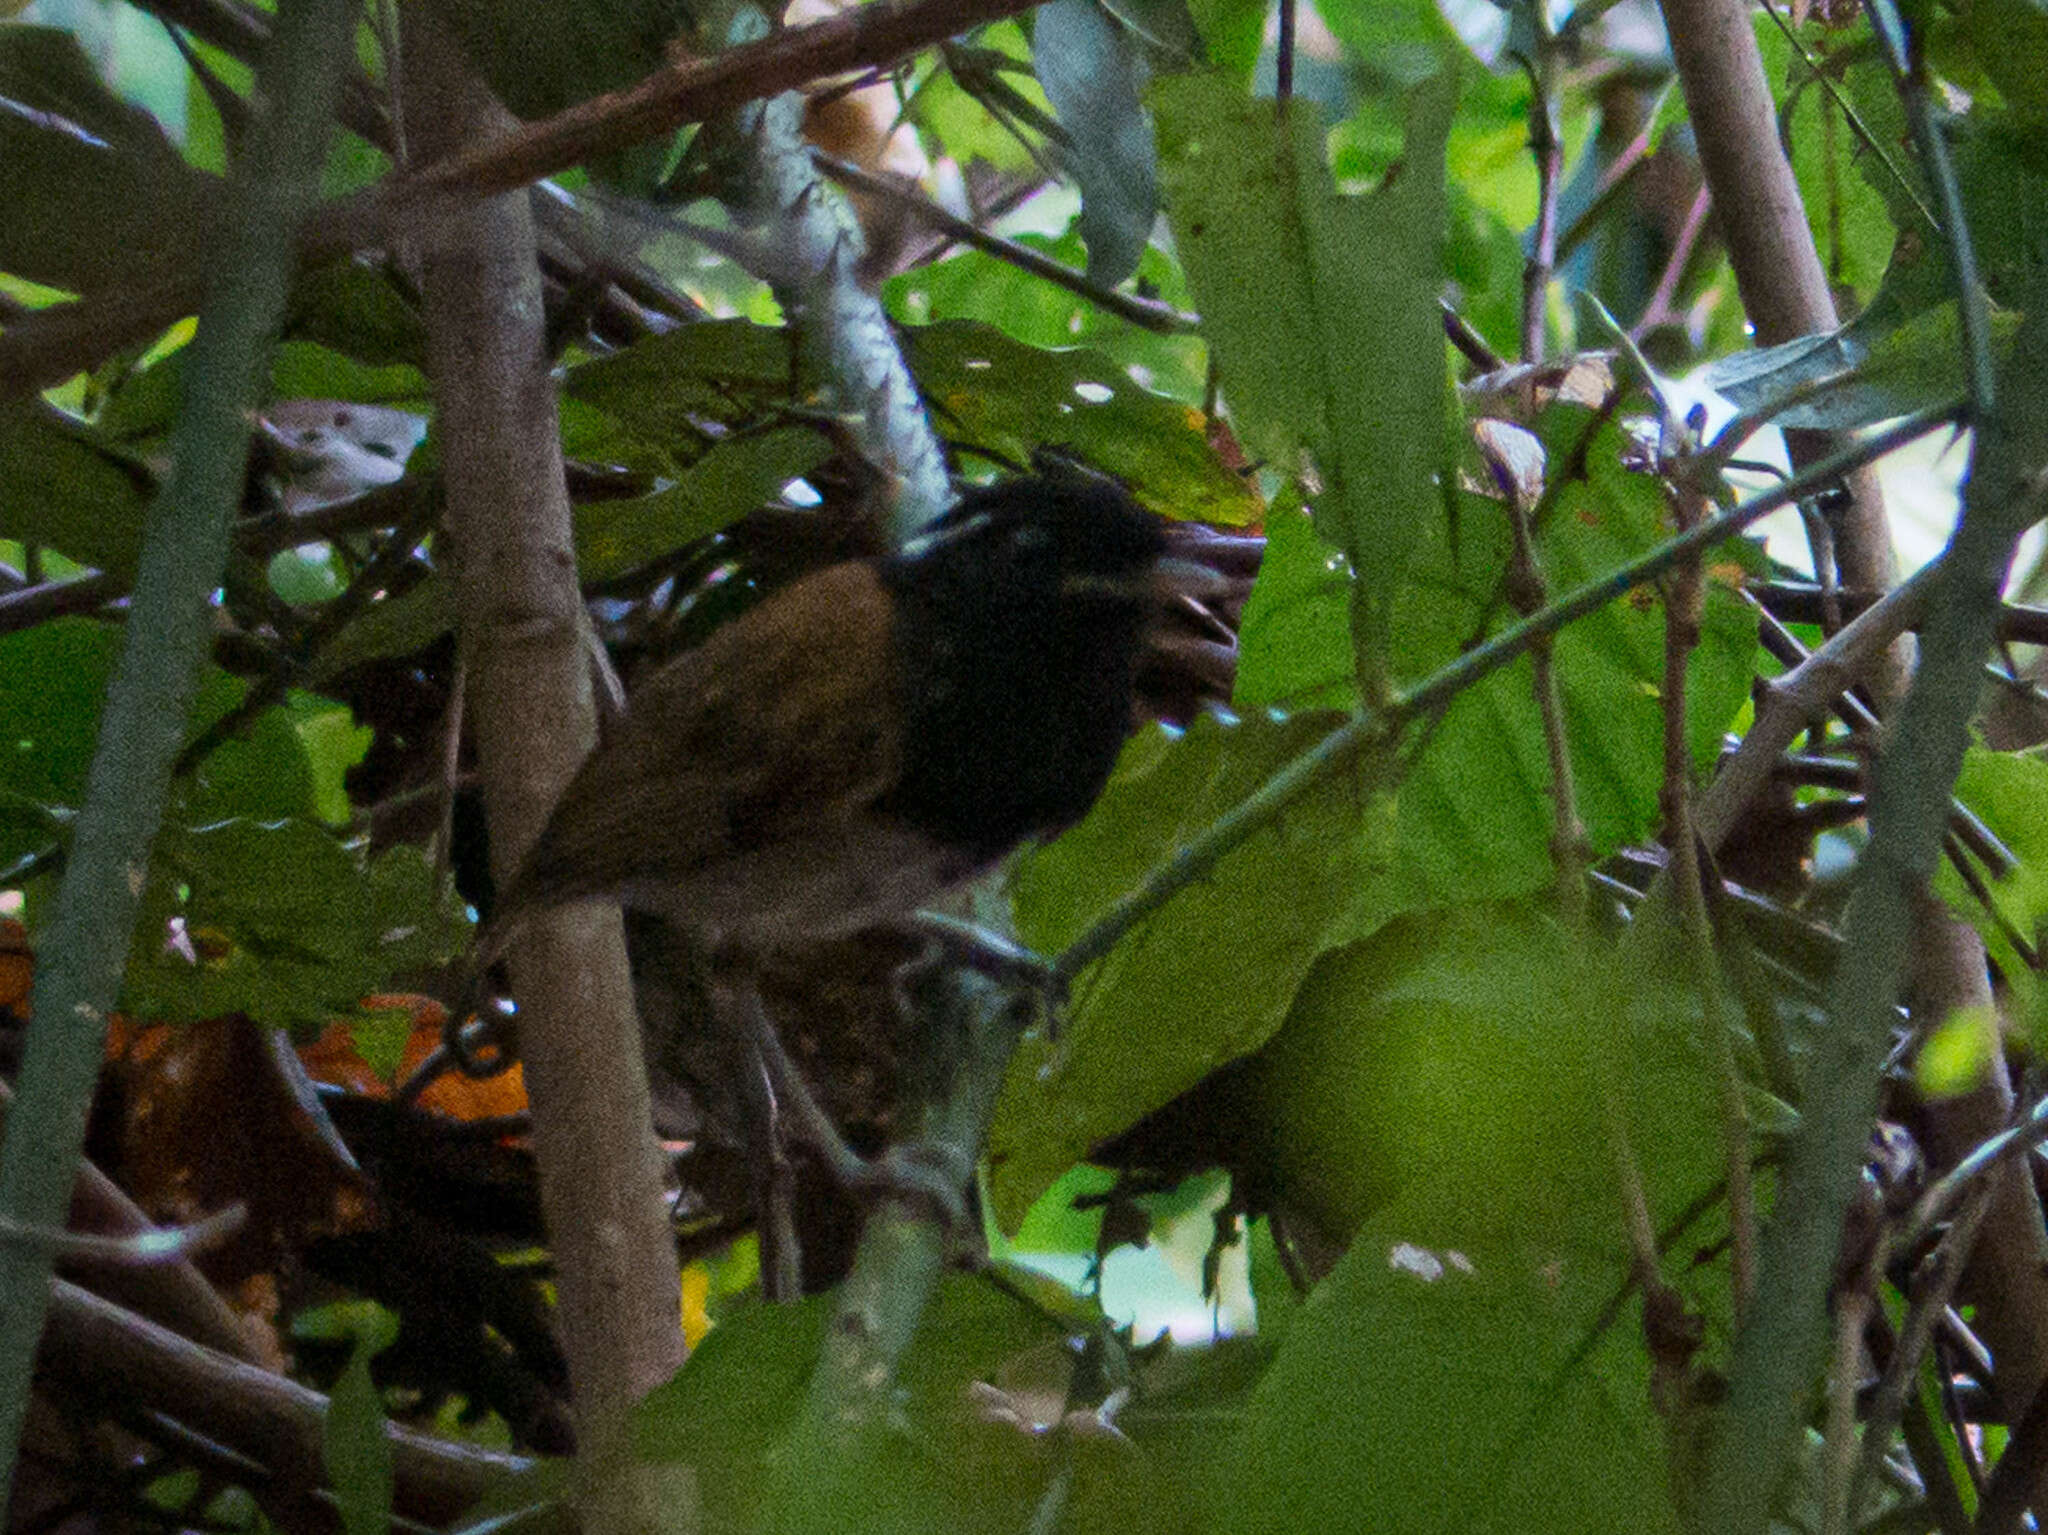 Image of Hooded Gnateater